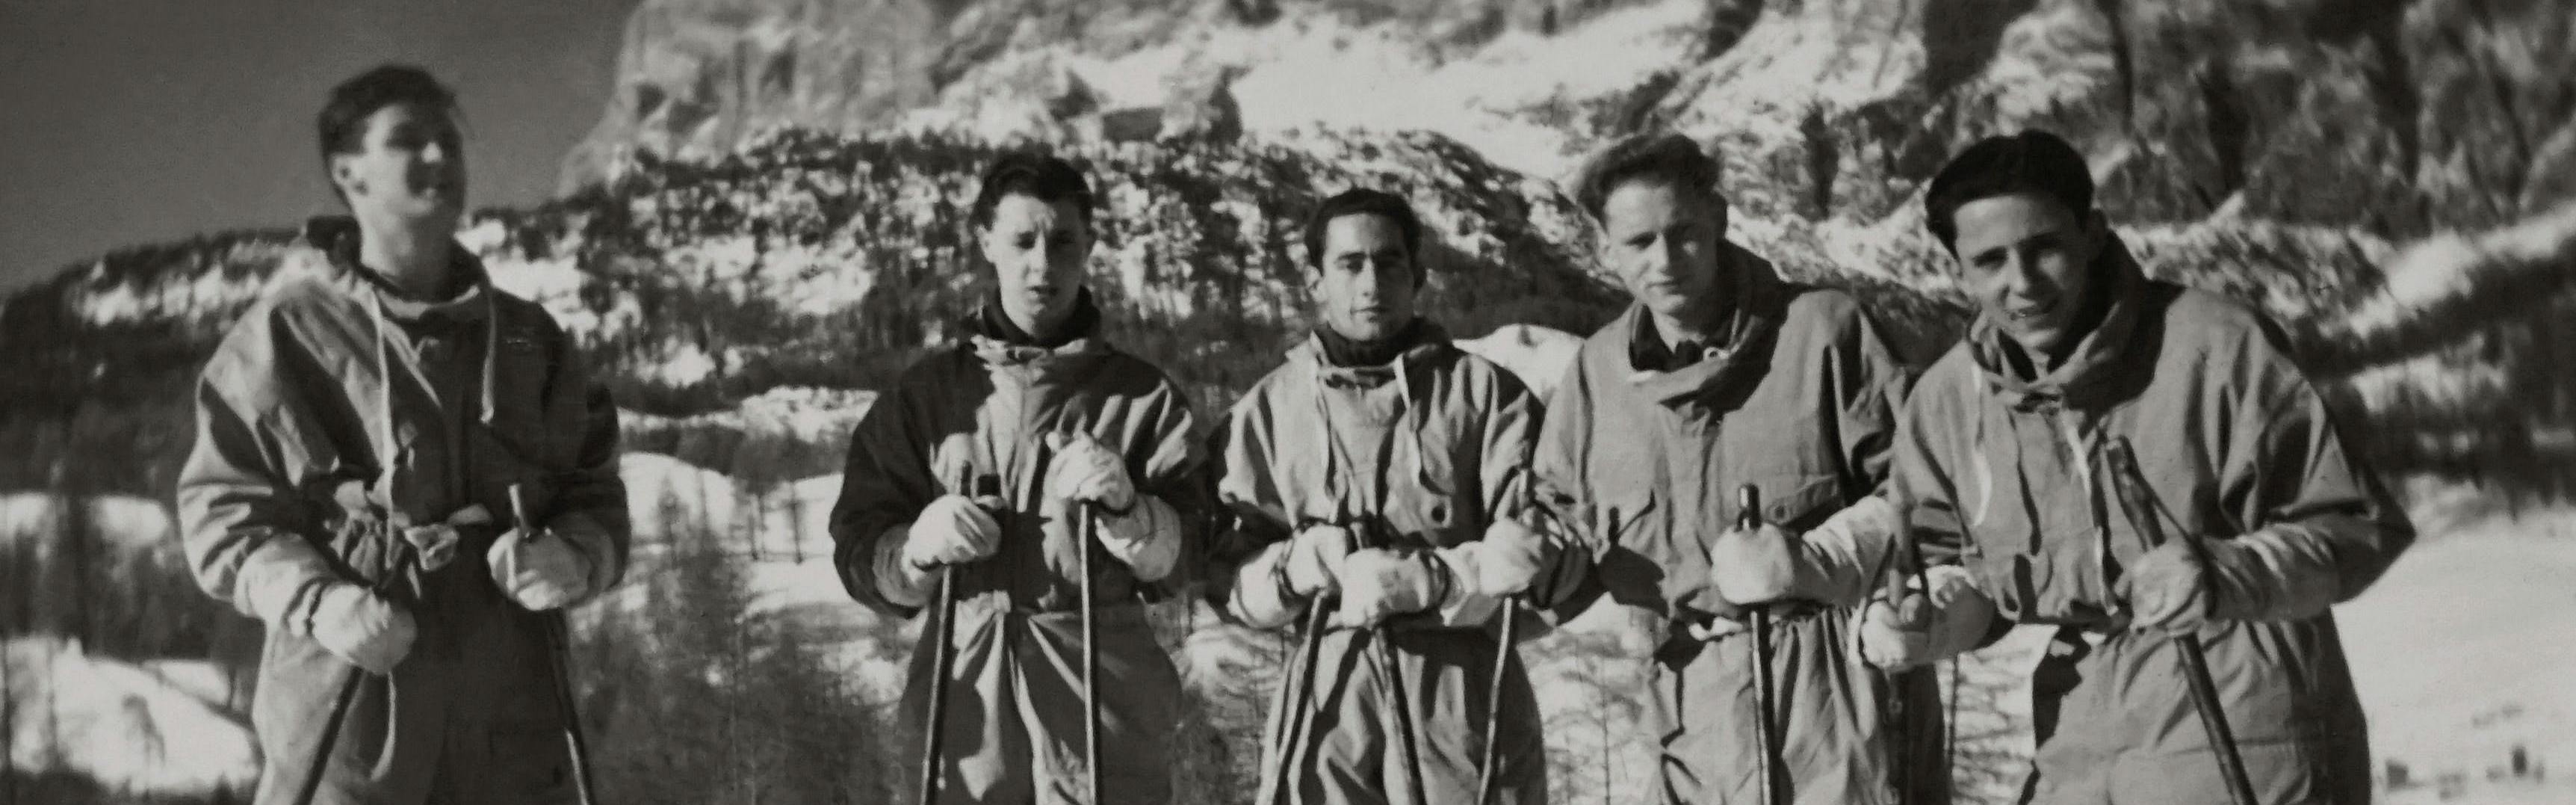 A black and white photo of a group of skiers.